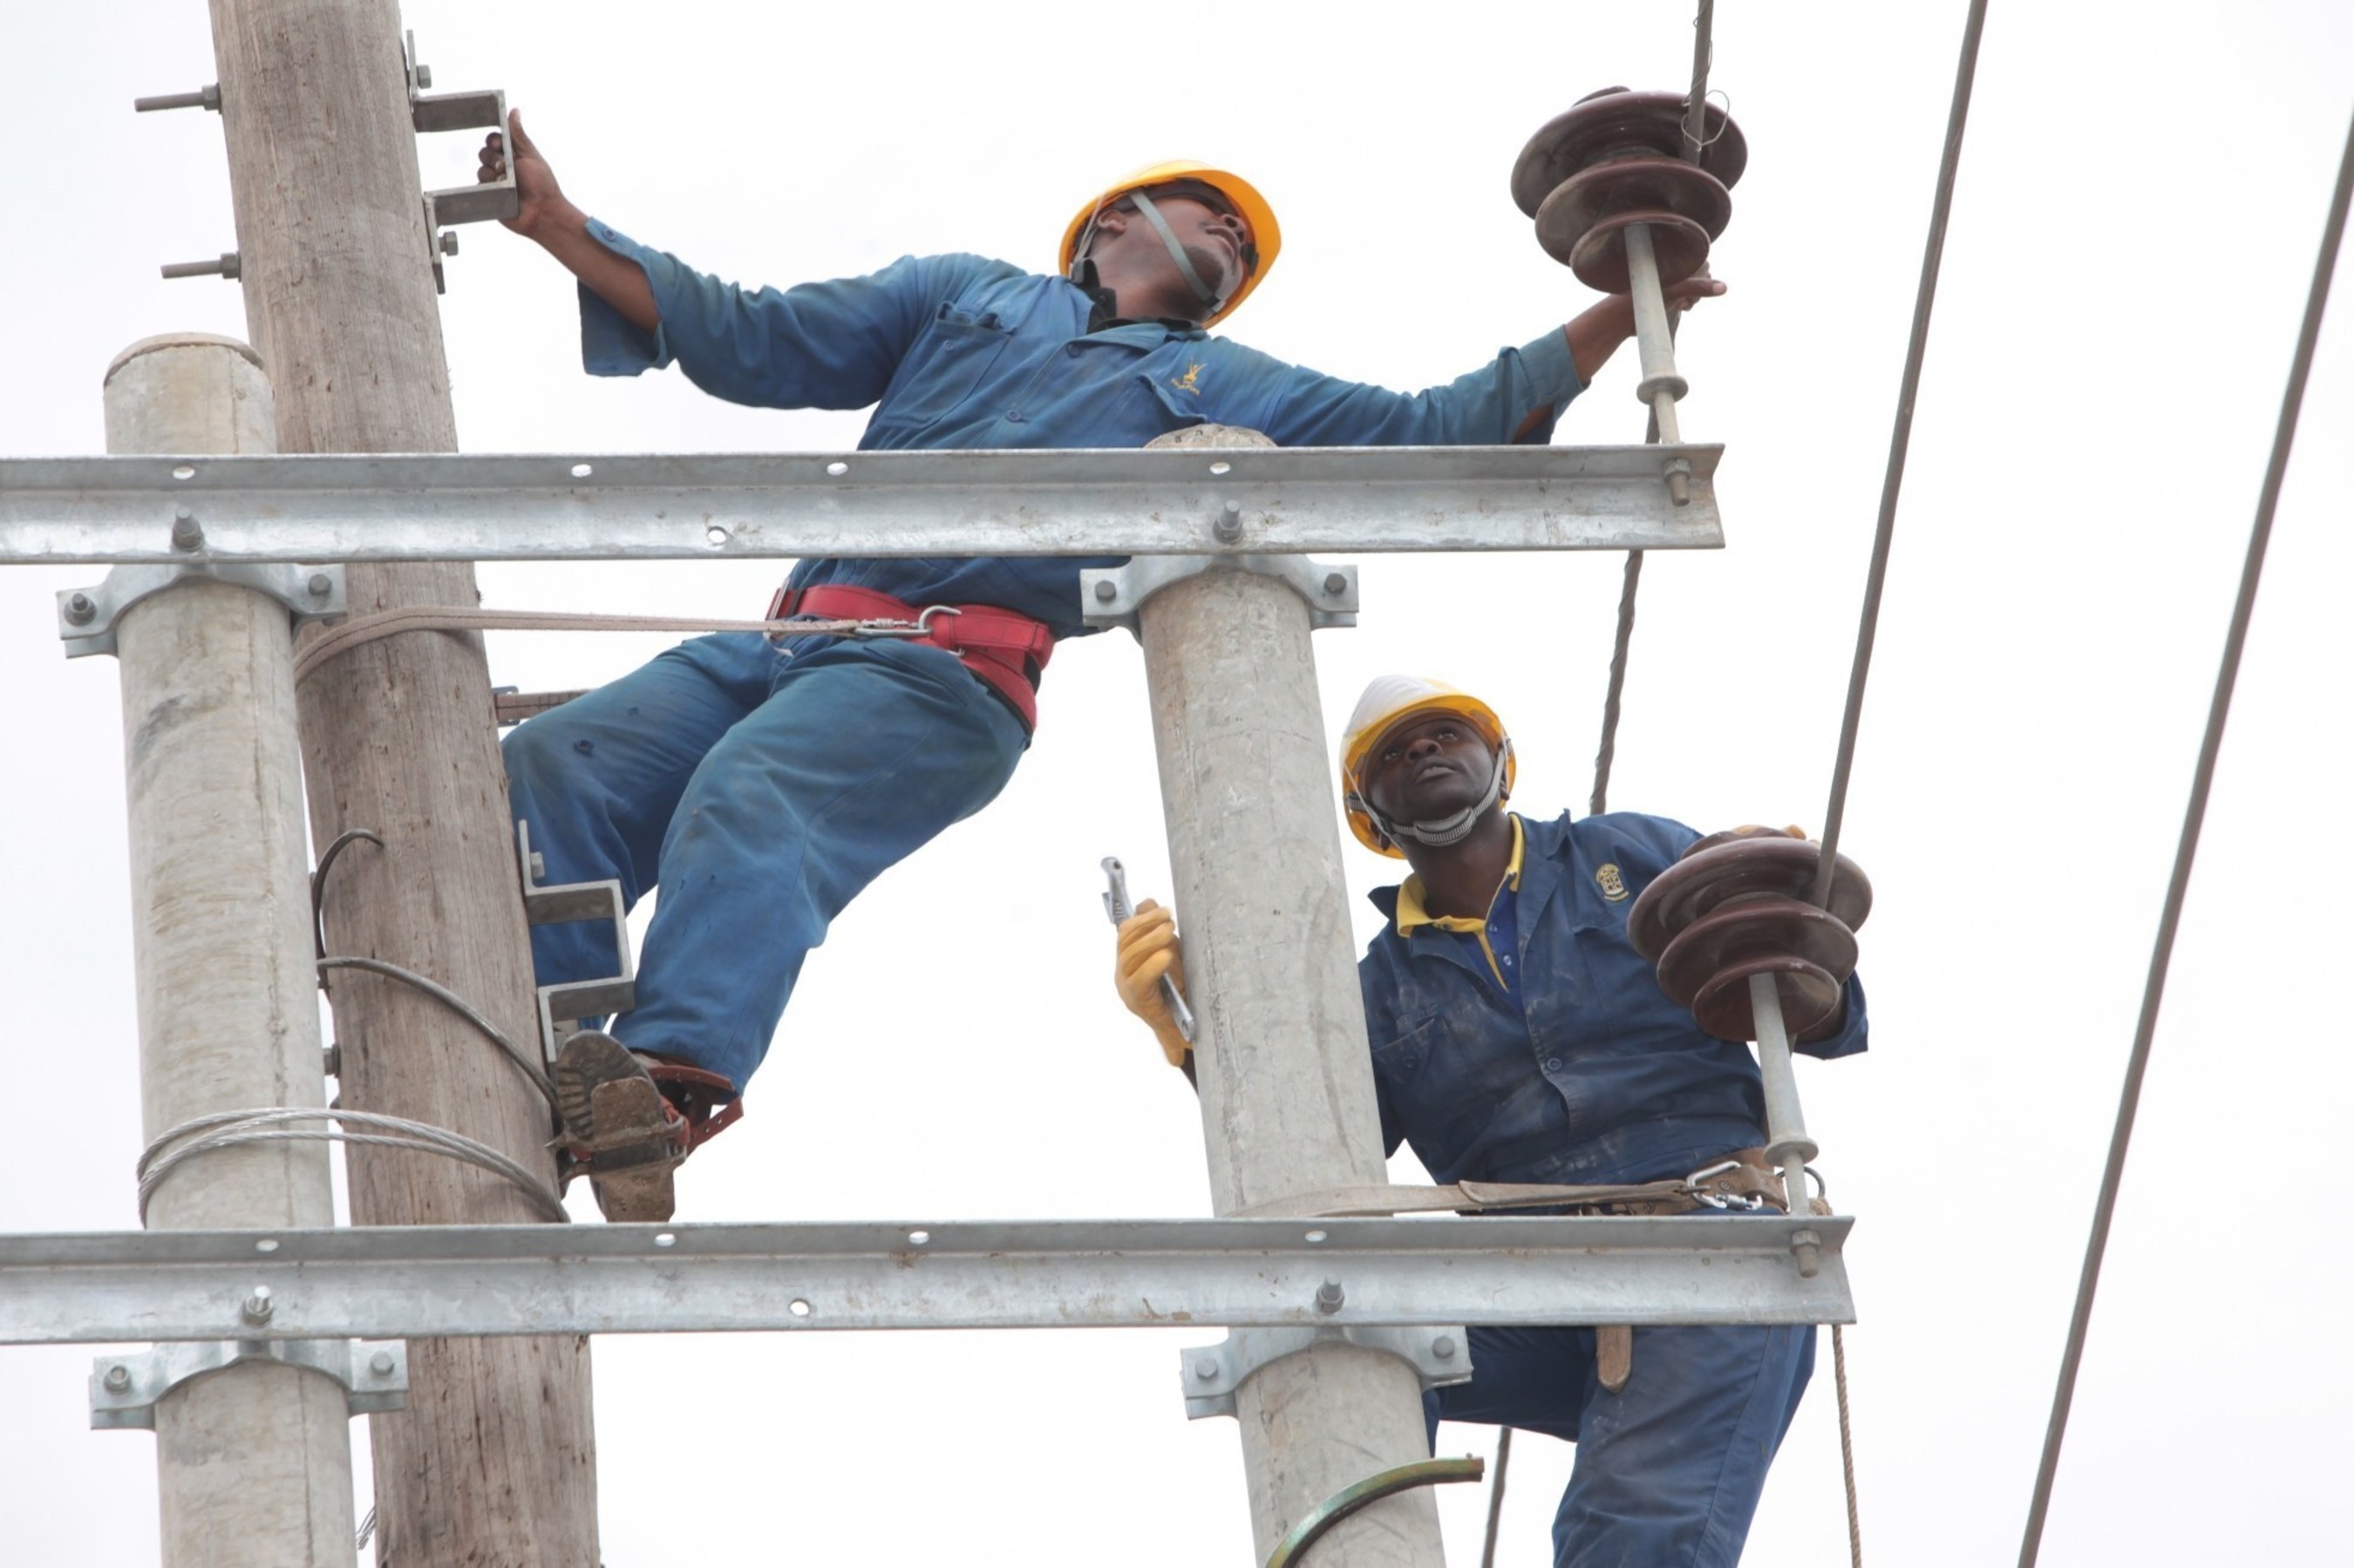 Kenya power staff replace an old transformer in Kenya's capital city Nairobi as part of the drive to scale up power supply from 2025 megawatts to 5000 megawatts. Credit: Courtesy of Kenya Power